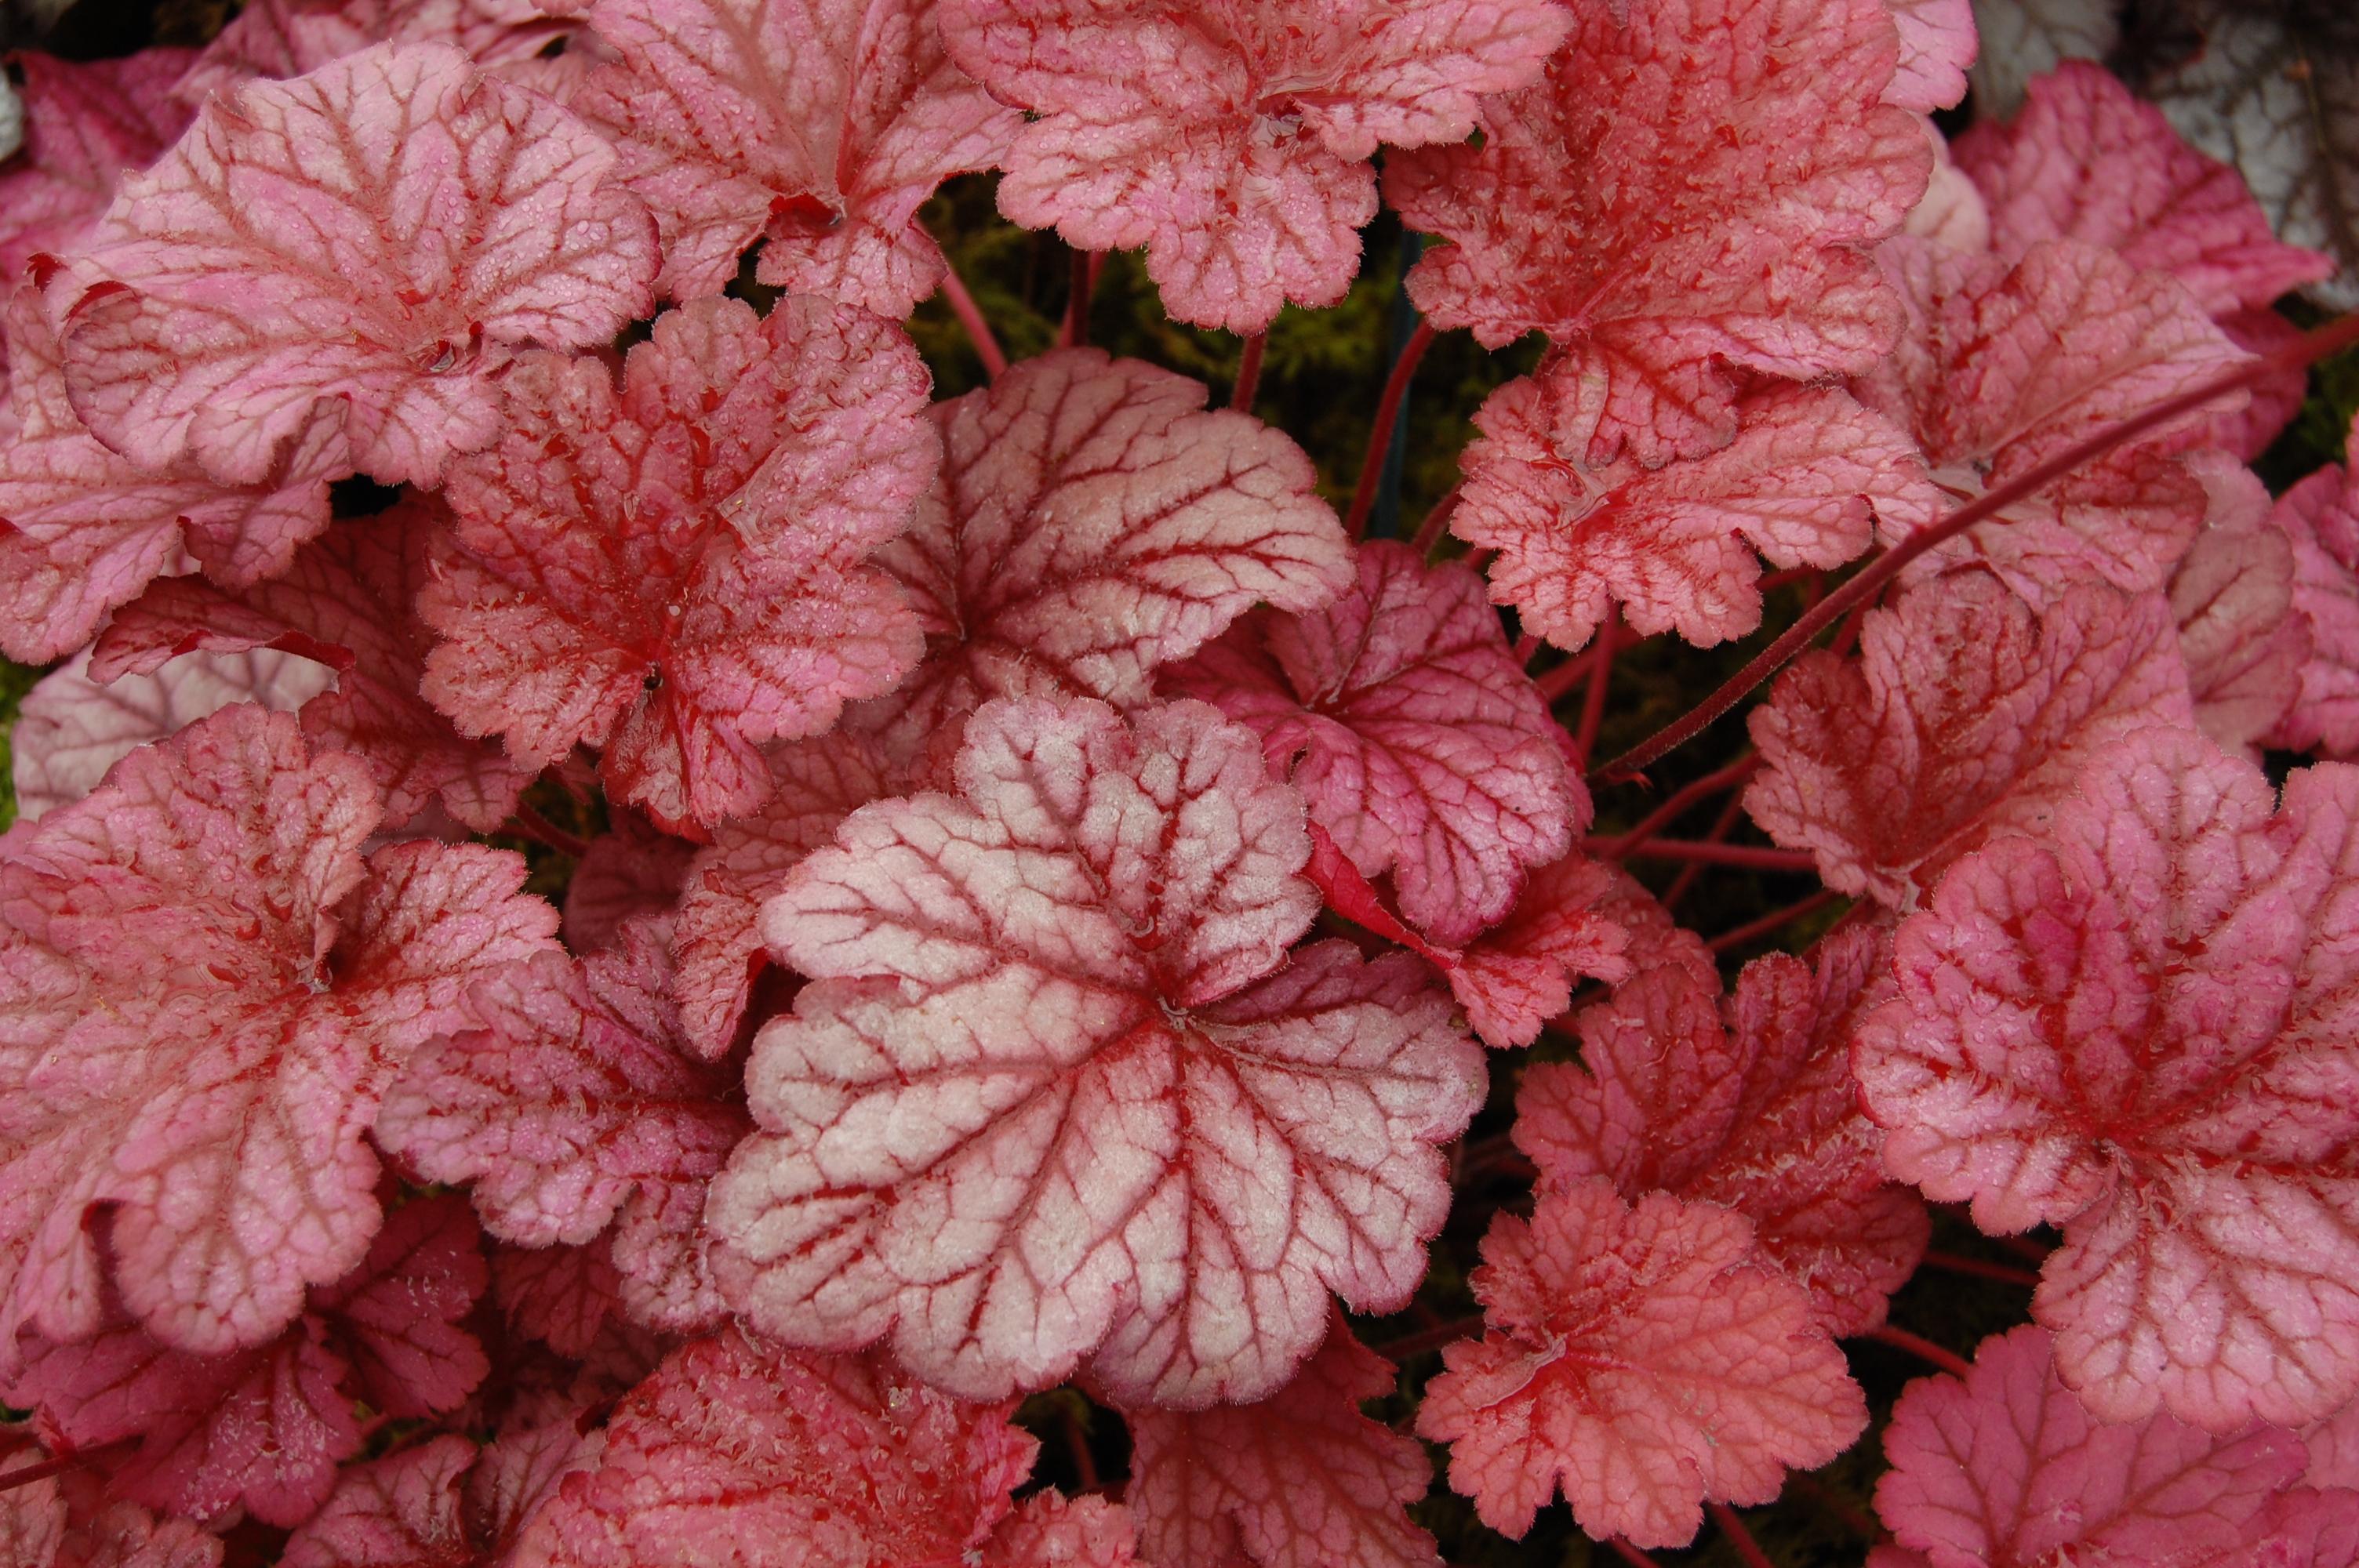 Red-White leaves with red midrib, red veins and stems.